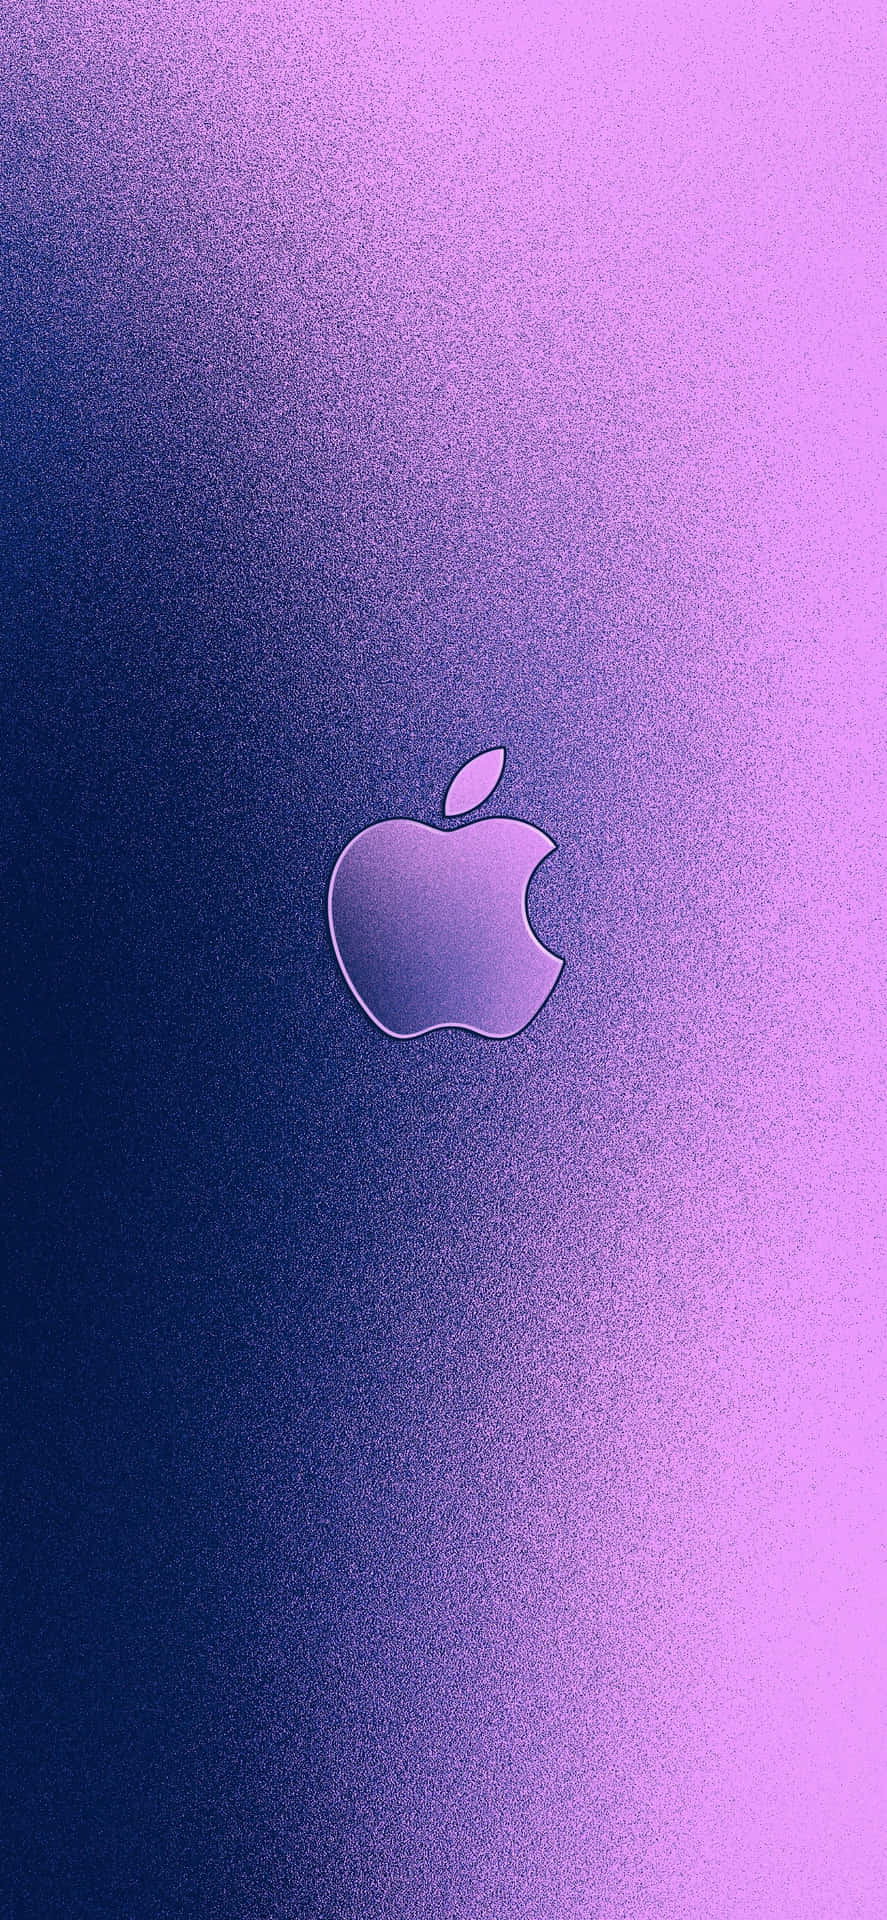 A Detailed Look at the Apple Logo on an iPhone X Wallpaper